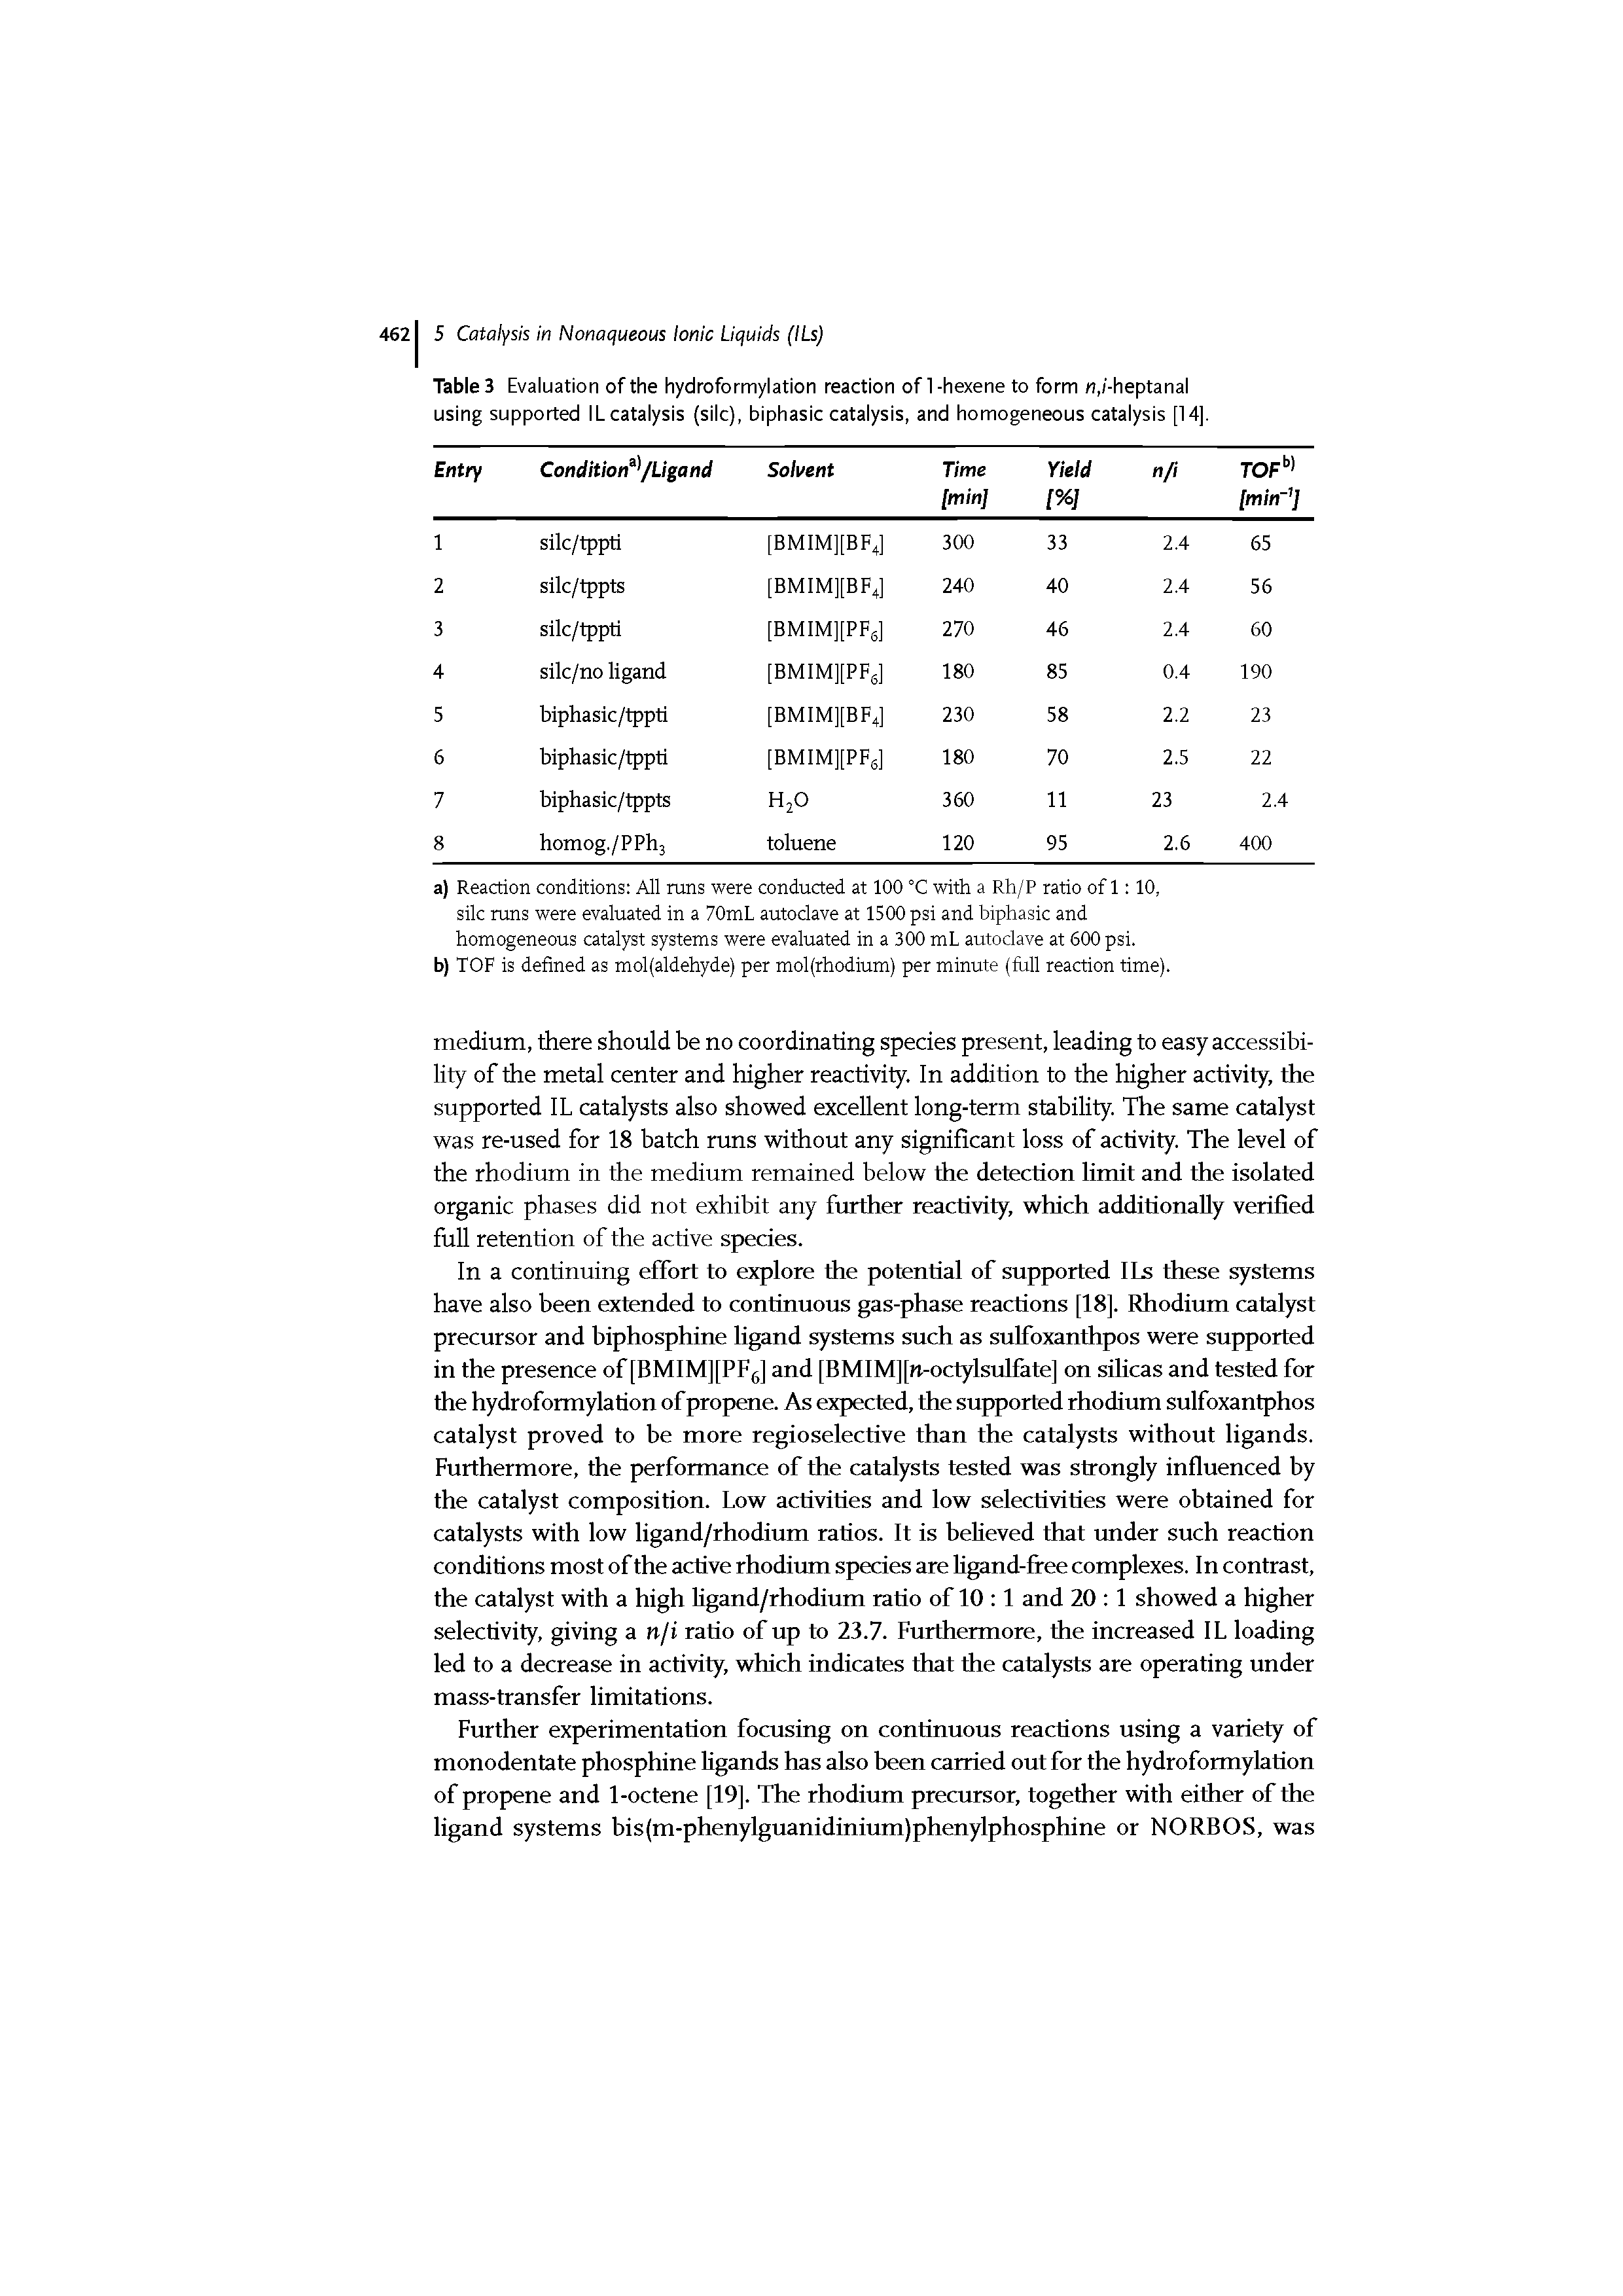 Tables Evaluation of the hydroformylation reaction of 1-hexene to form n,/-heptanal using supported ILcatalysis (silc), biphasic catalysis, and homogeneous catalysis [14].